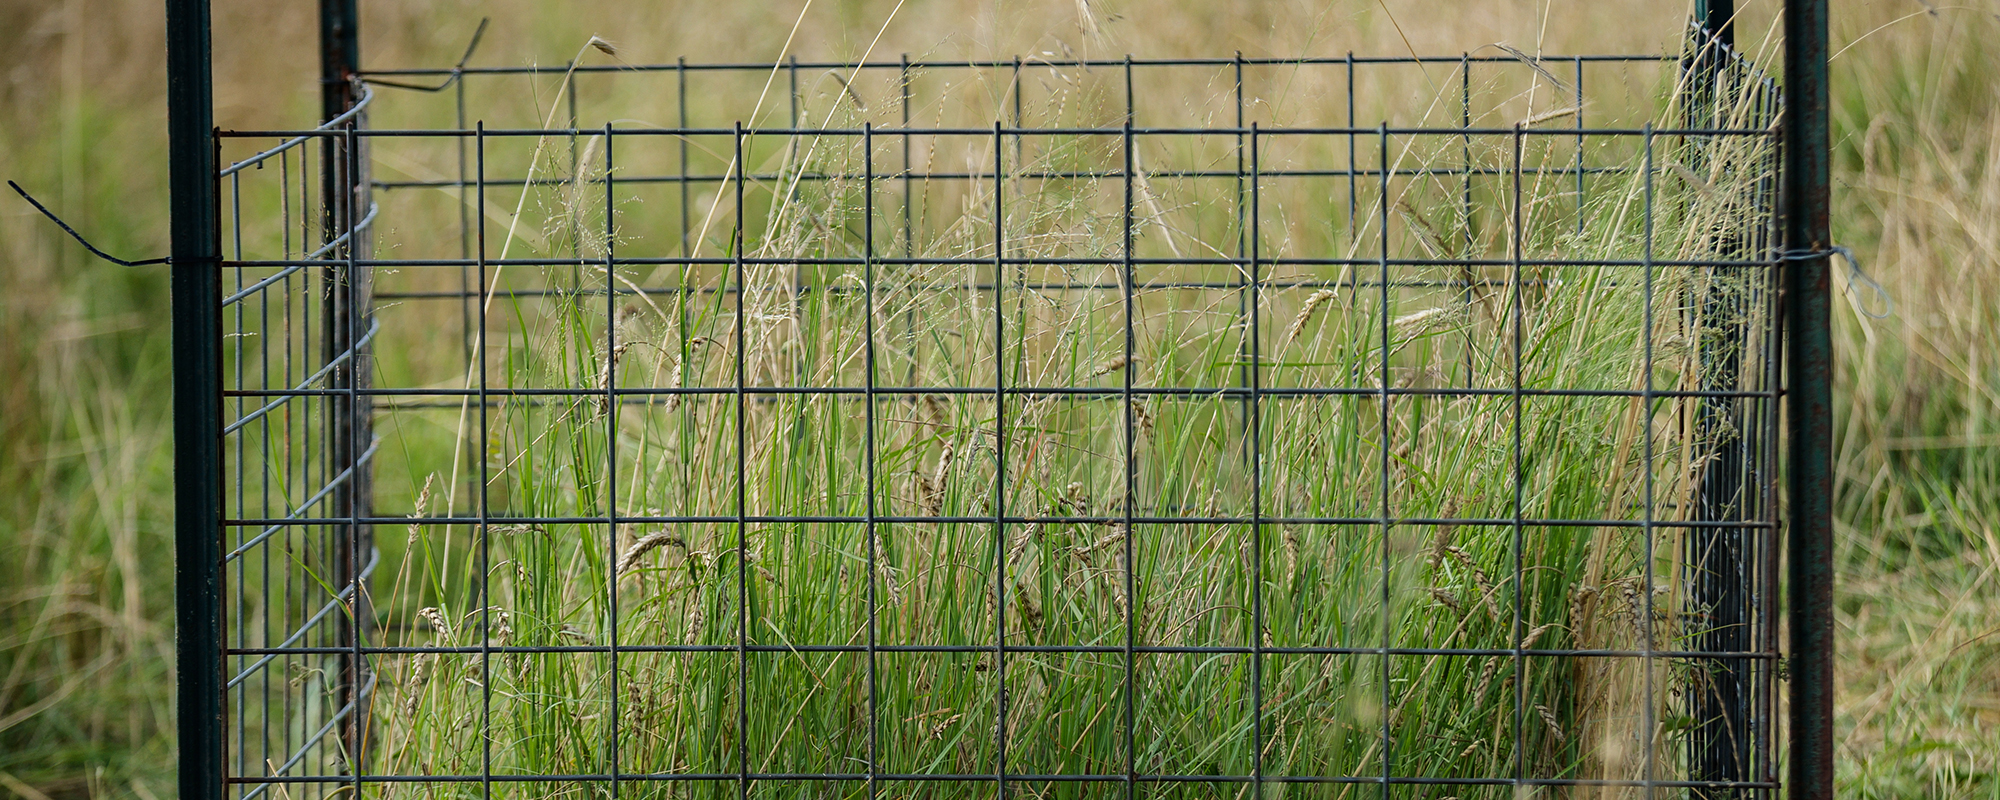 Gain a new view of your pastures’ forage potential